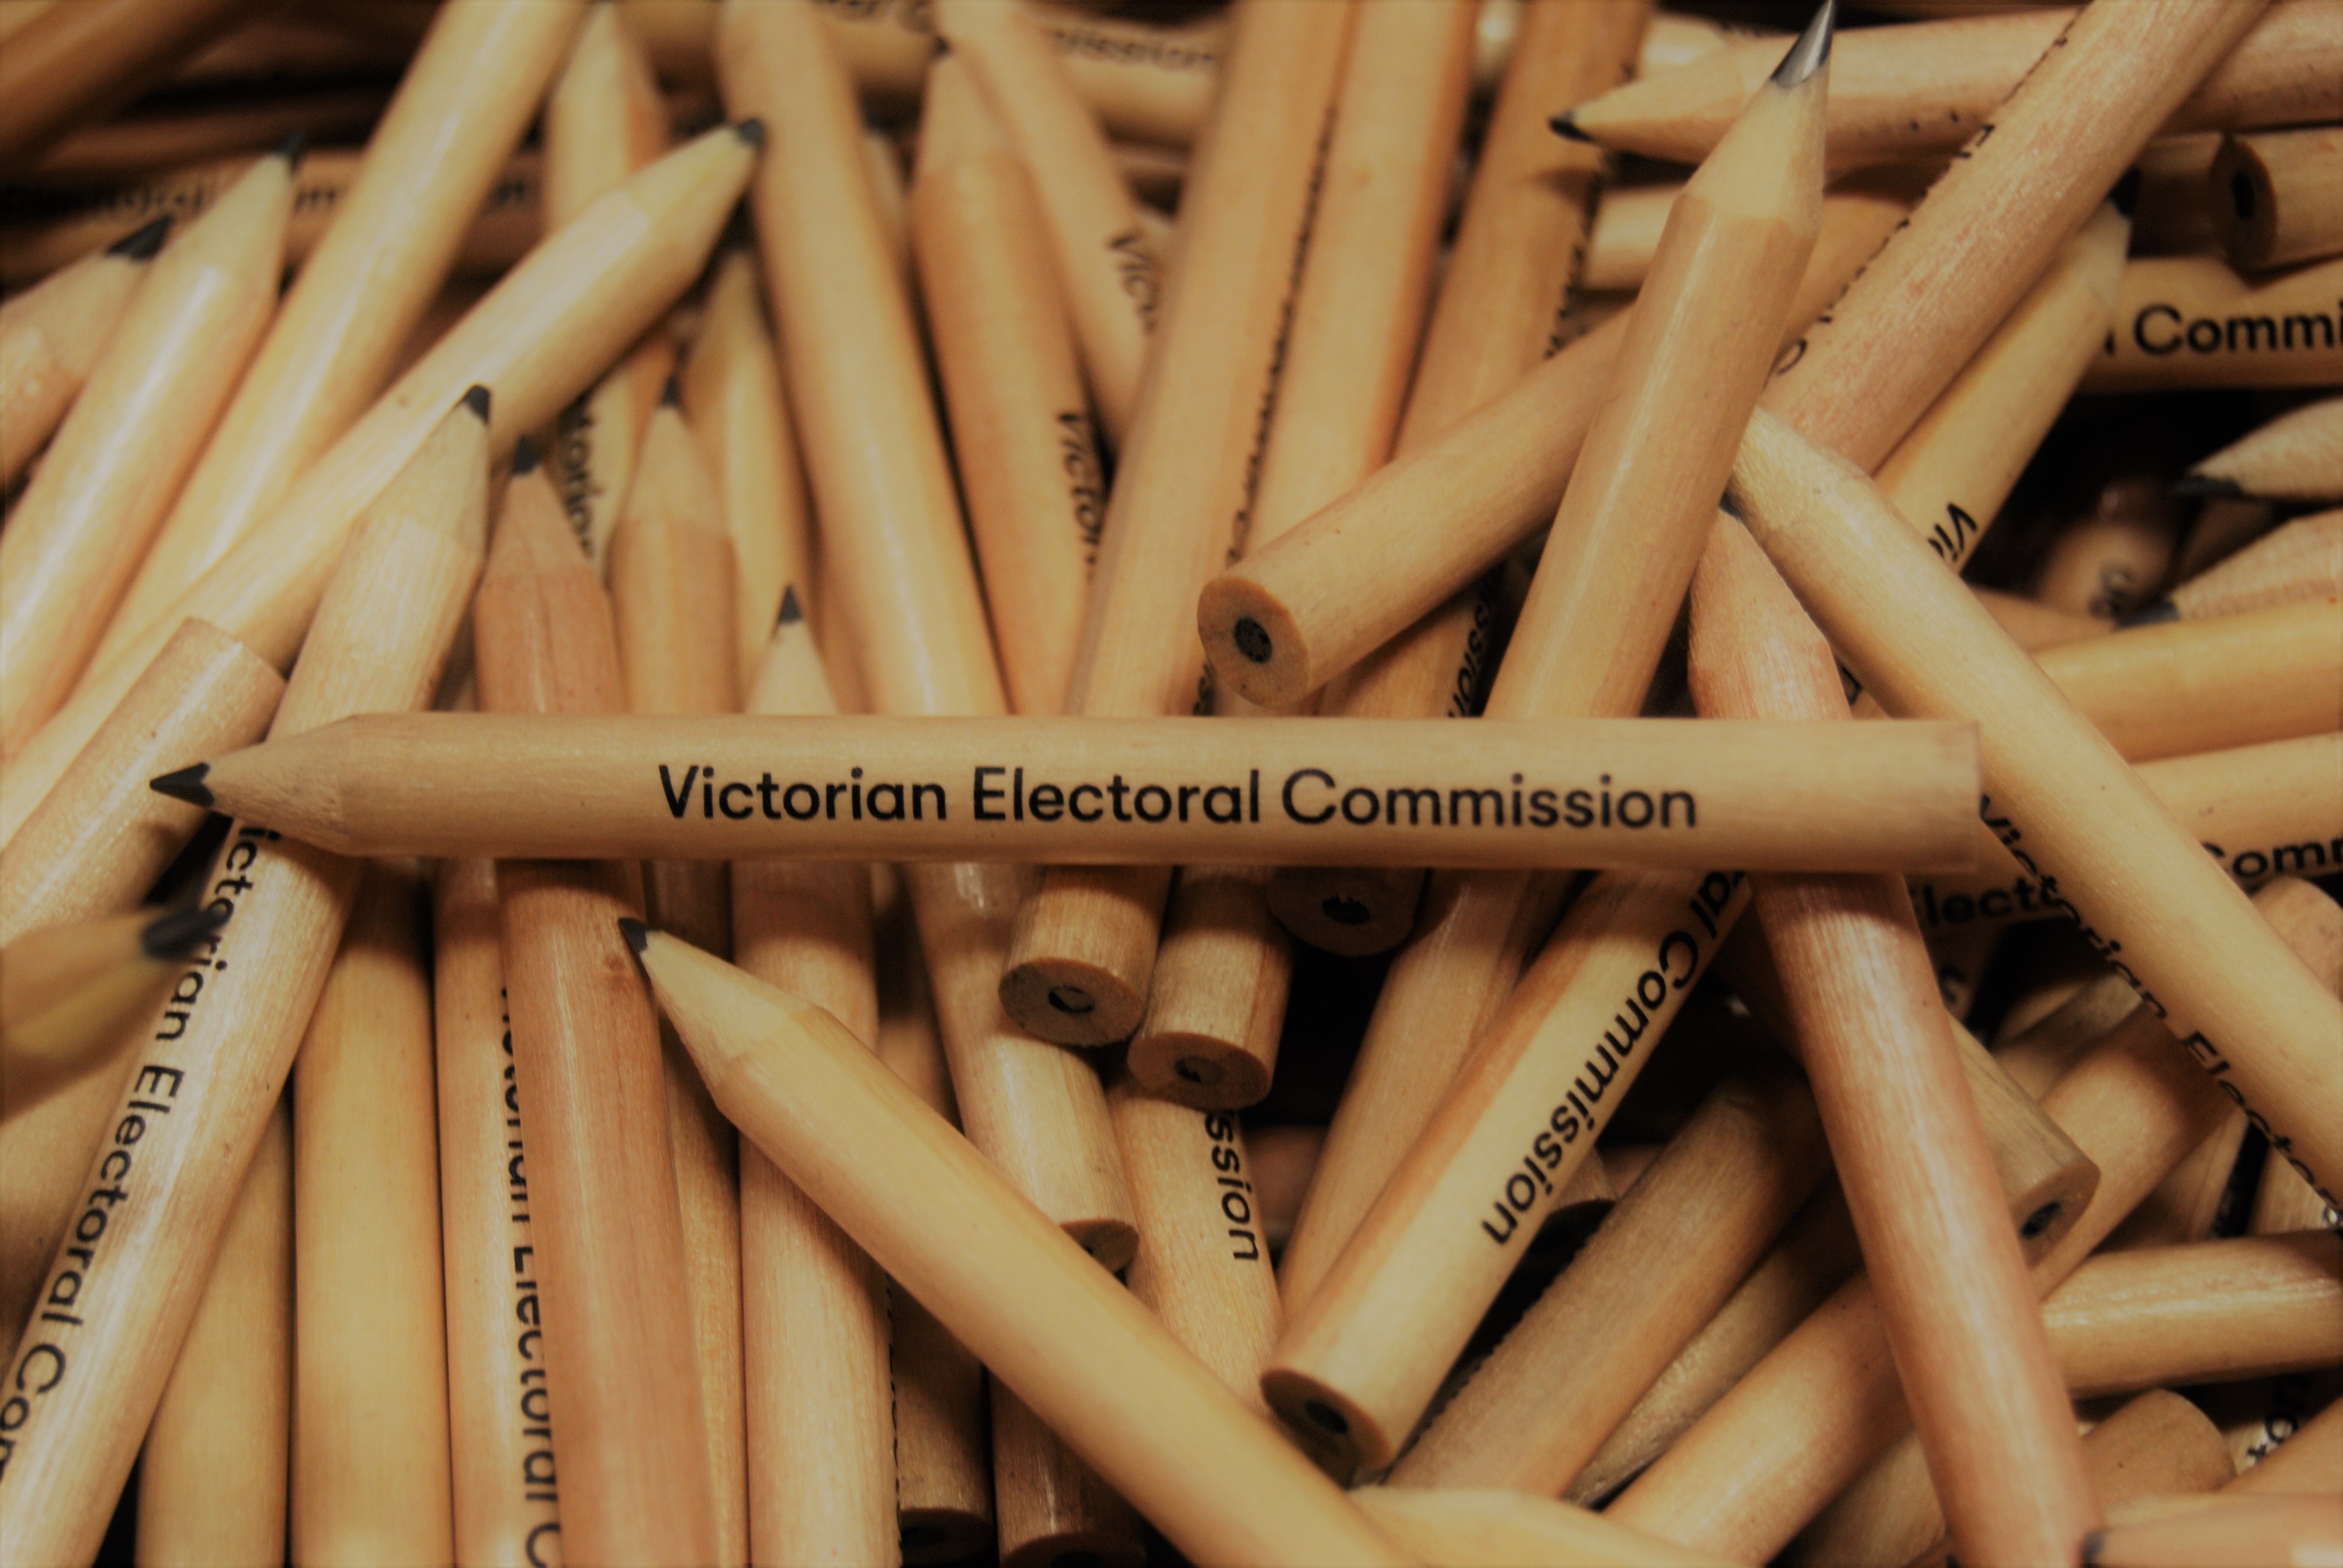 A pile of pencils used by the Victorian Electoral Commission.